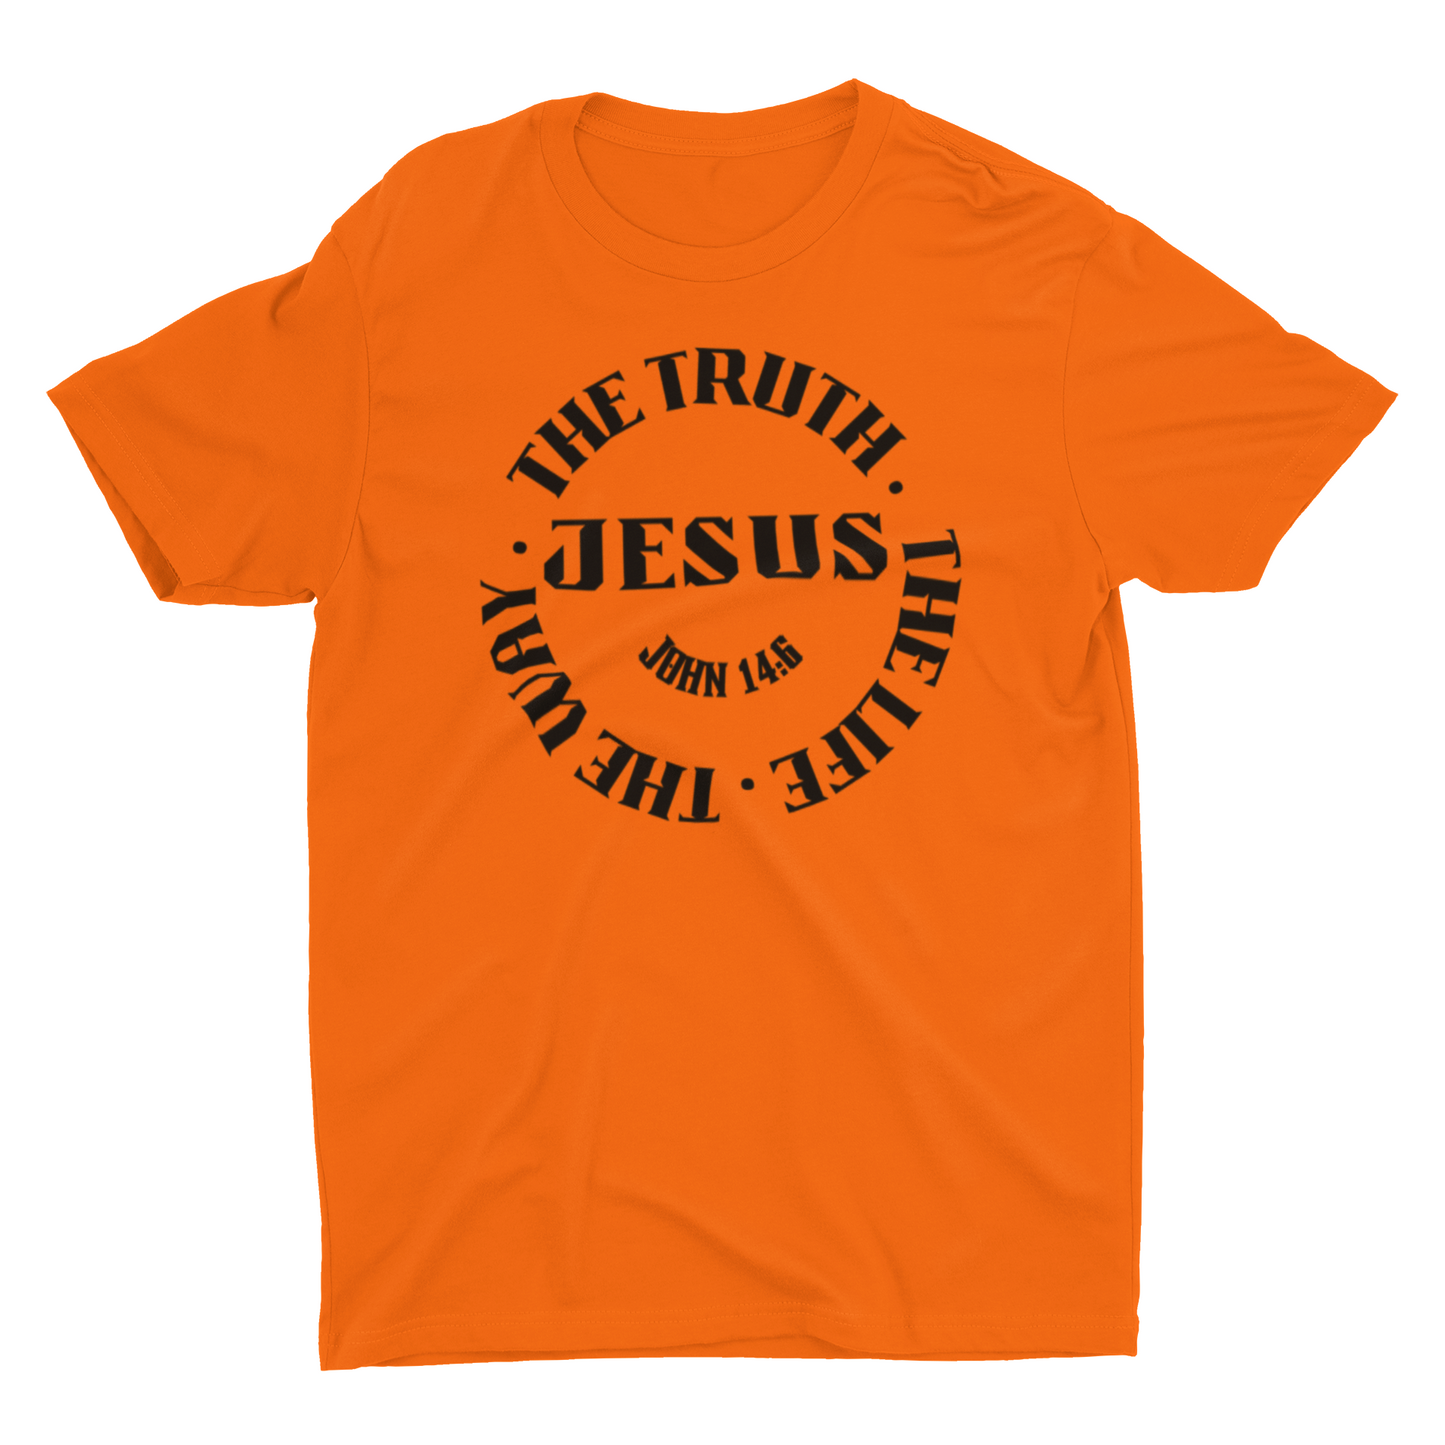 Jesus The Way The Truth and The Life t-shirt